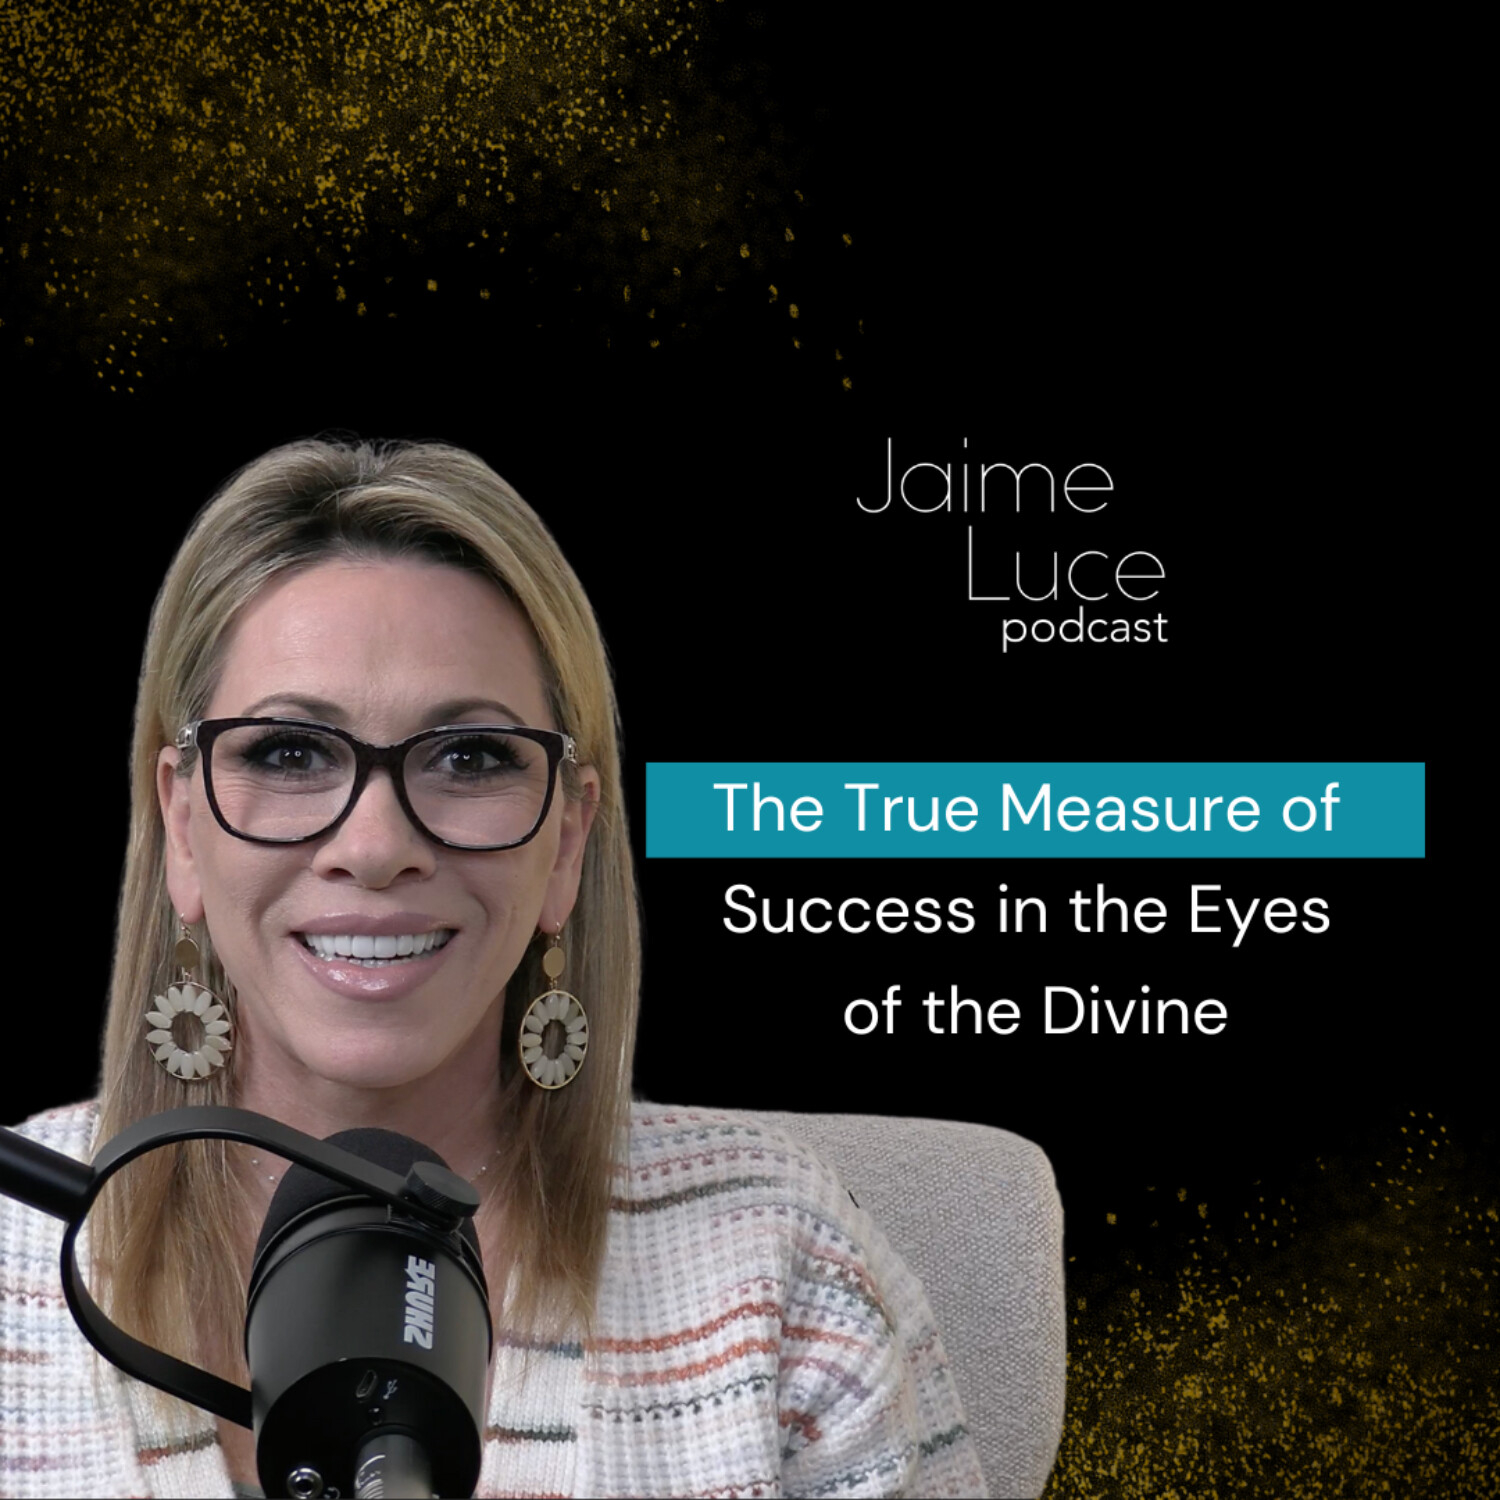 The True Measure of Success in the Eyes of the Divine